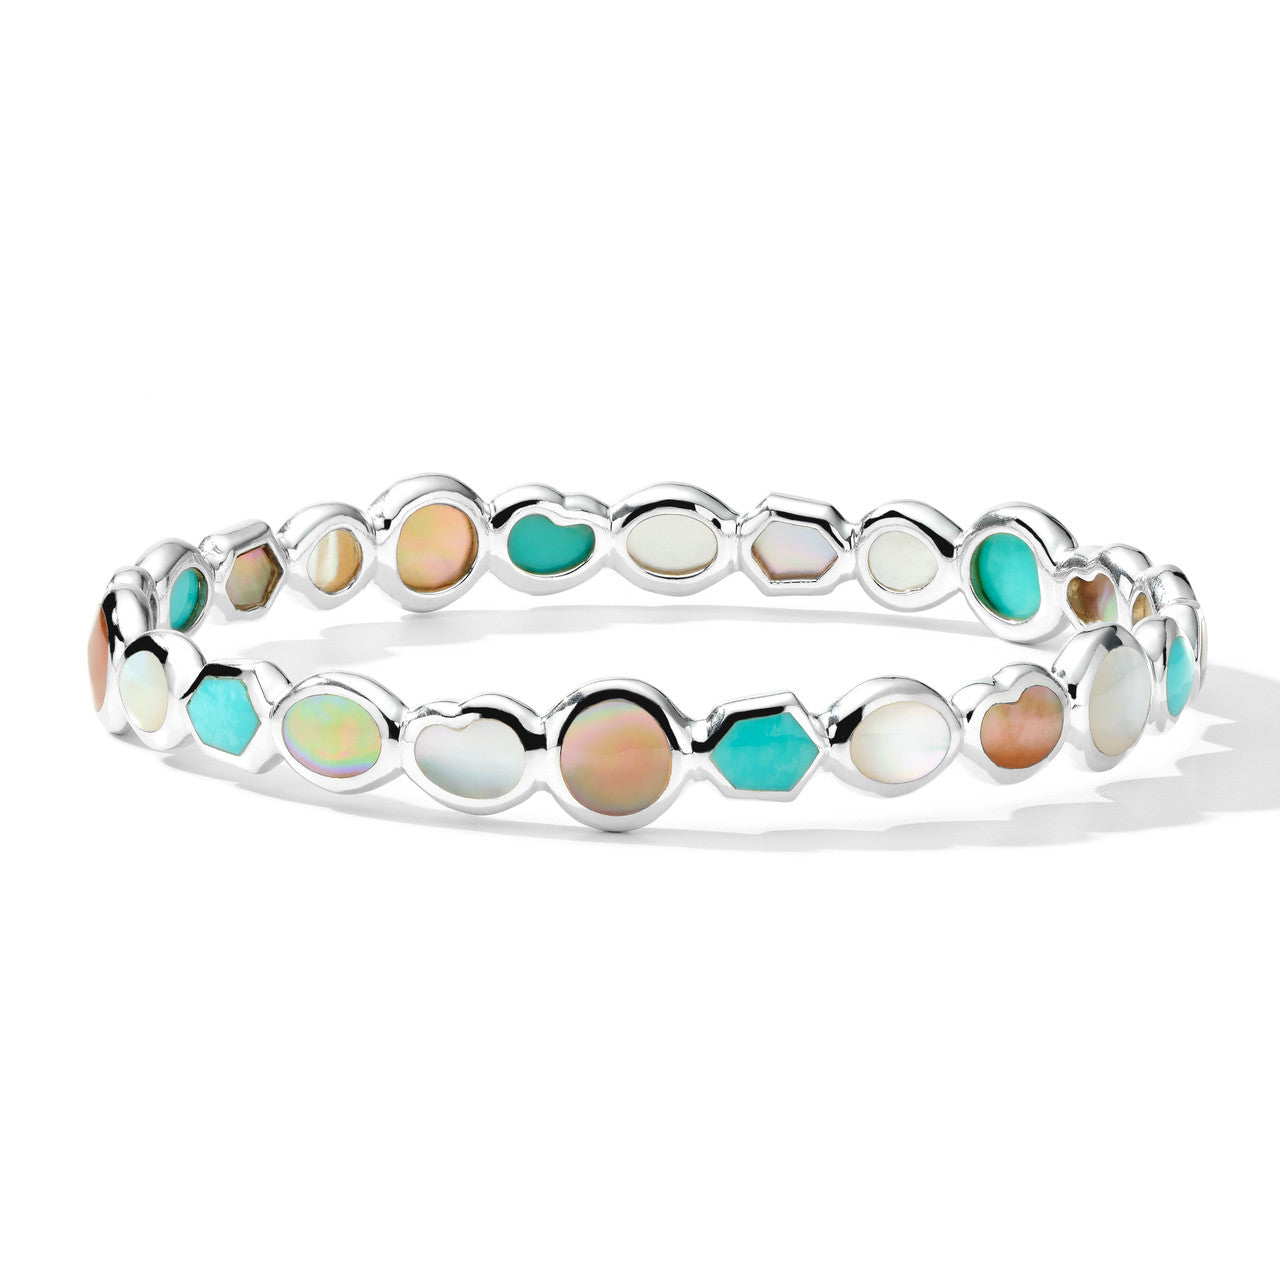 All-Over Stone Bangle in Isola